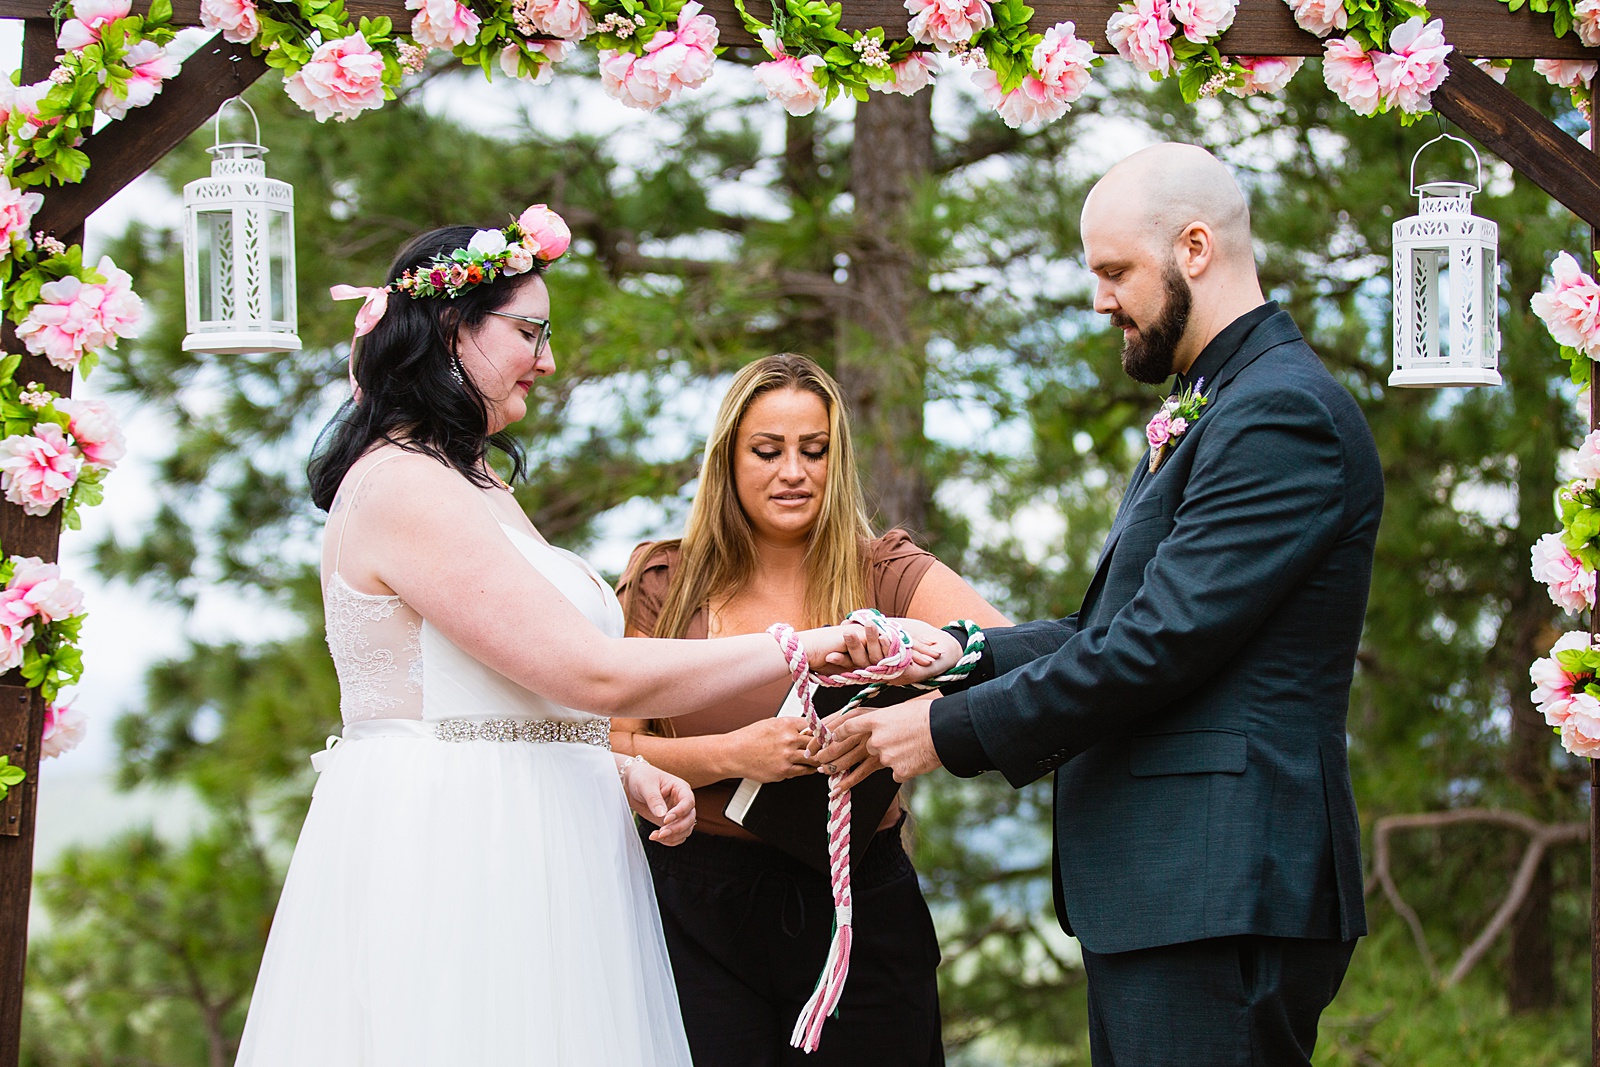 Bride & Groom handfasting togethering during Mogollon Rim wedding ceremony by Payson elopement photographer PMA Photography.